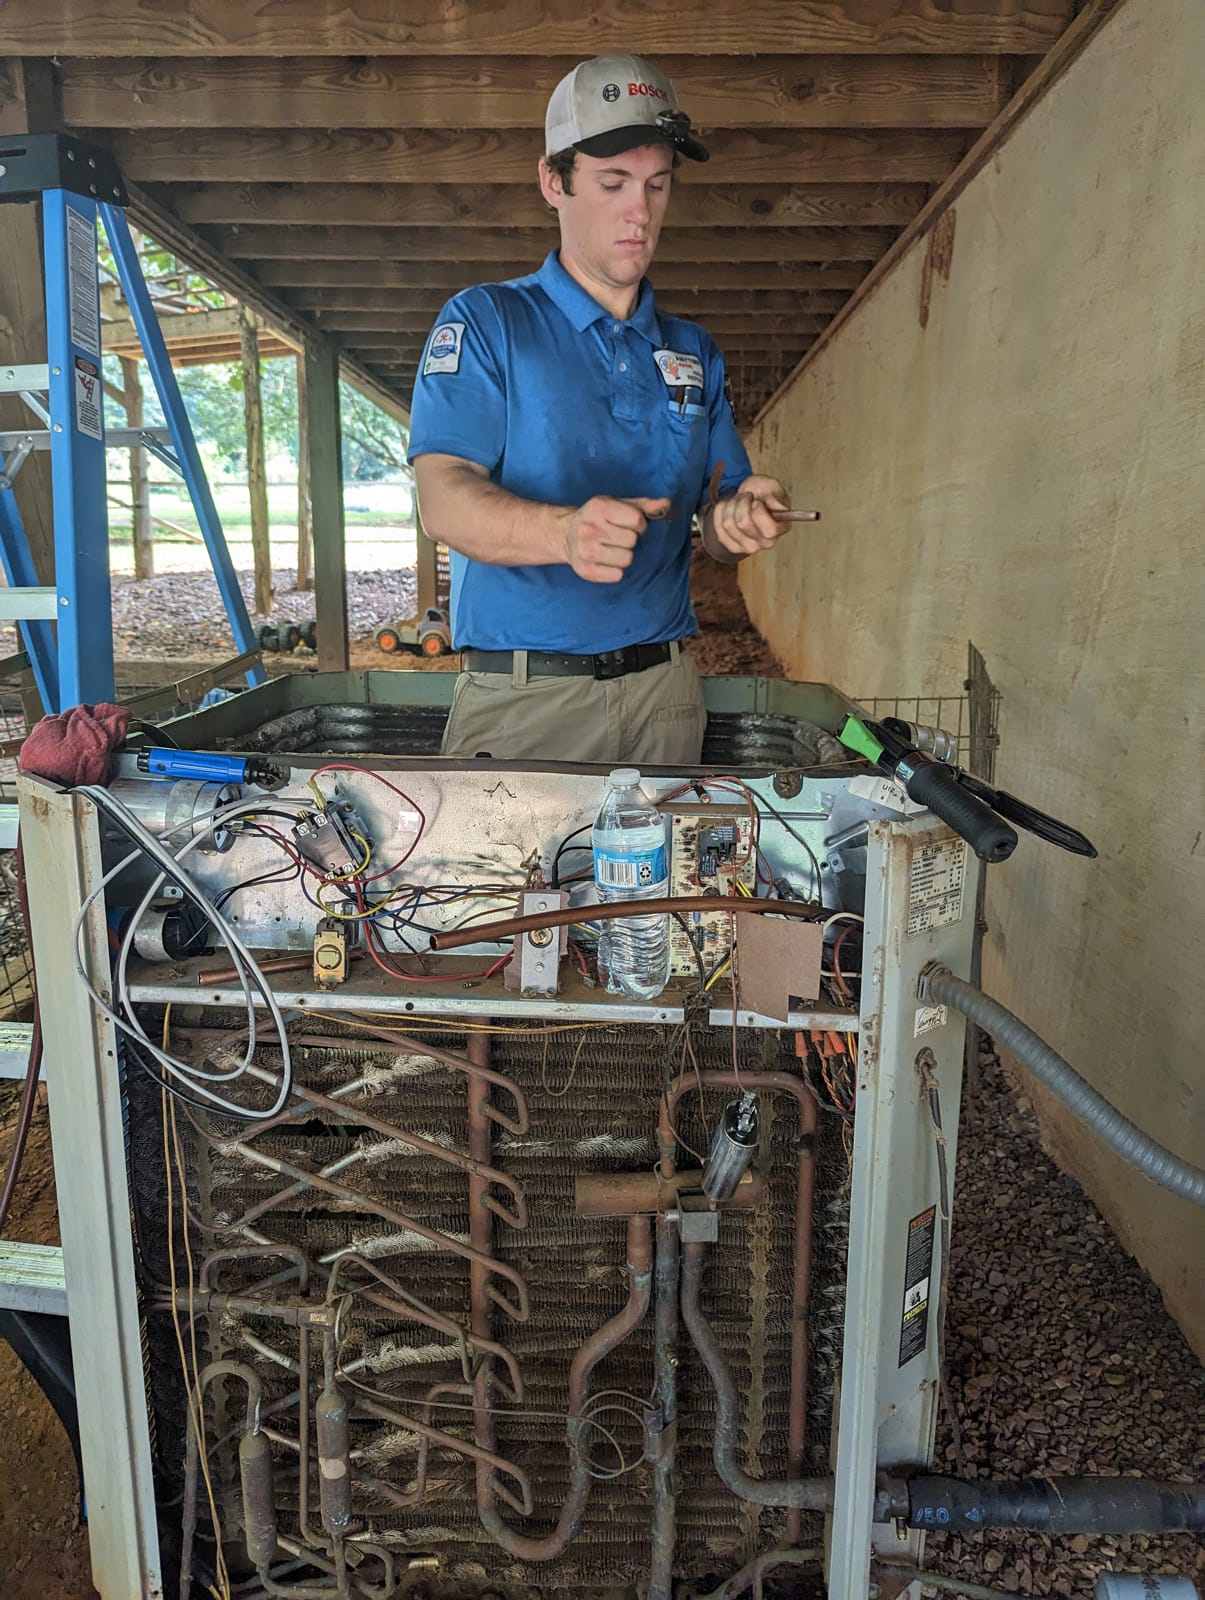 A technician understanding HVAC system components while repairing an air conditioner unit.